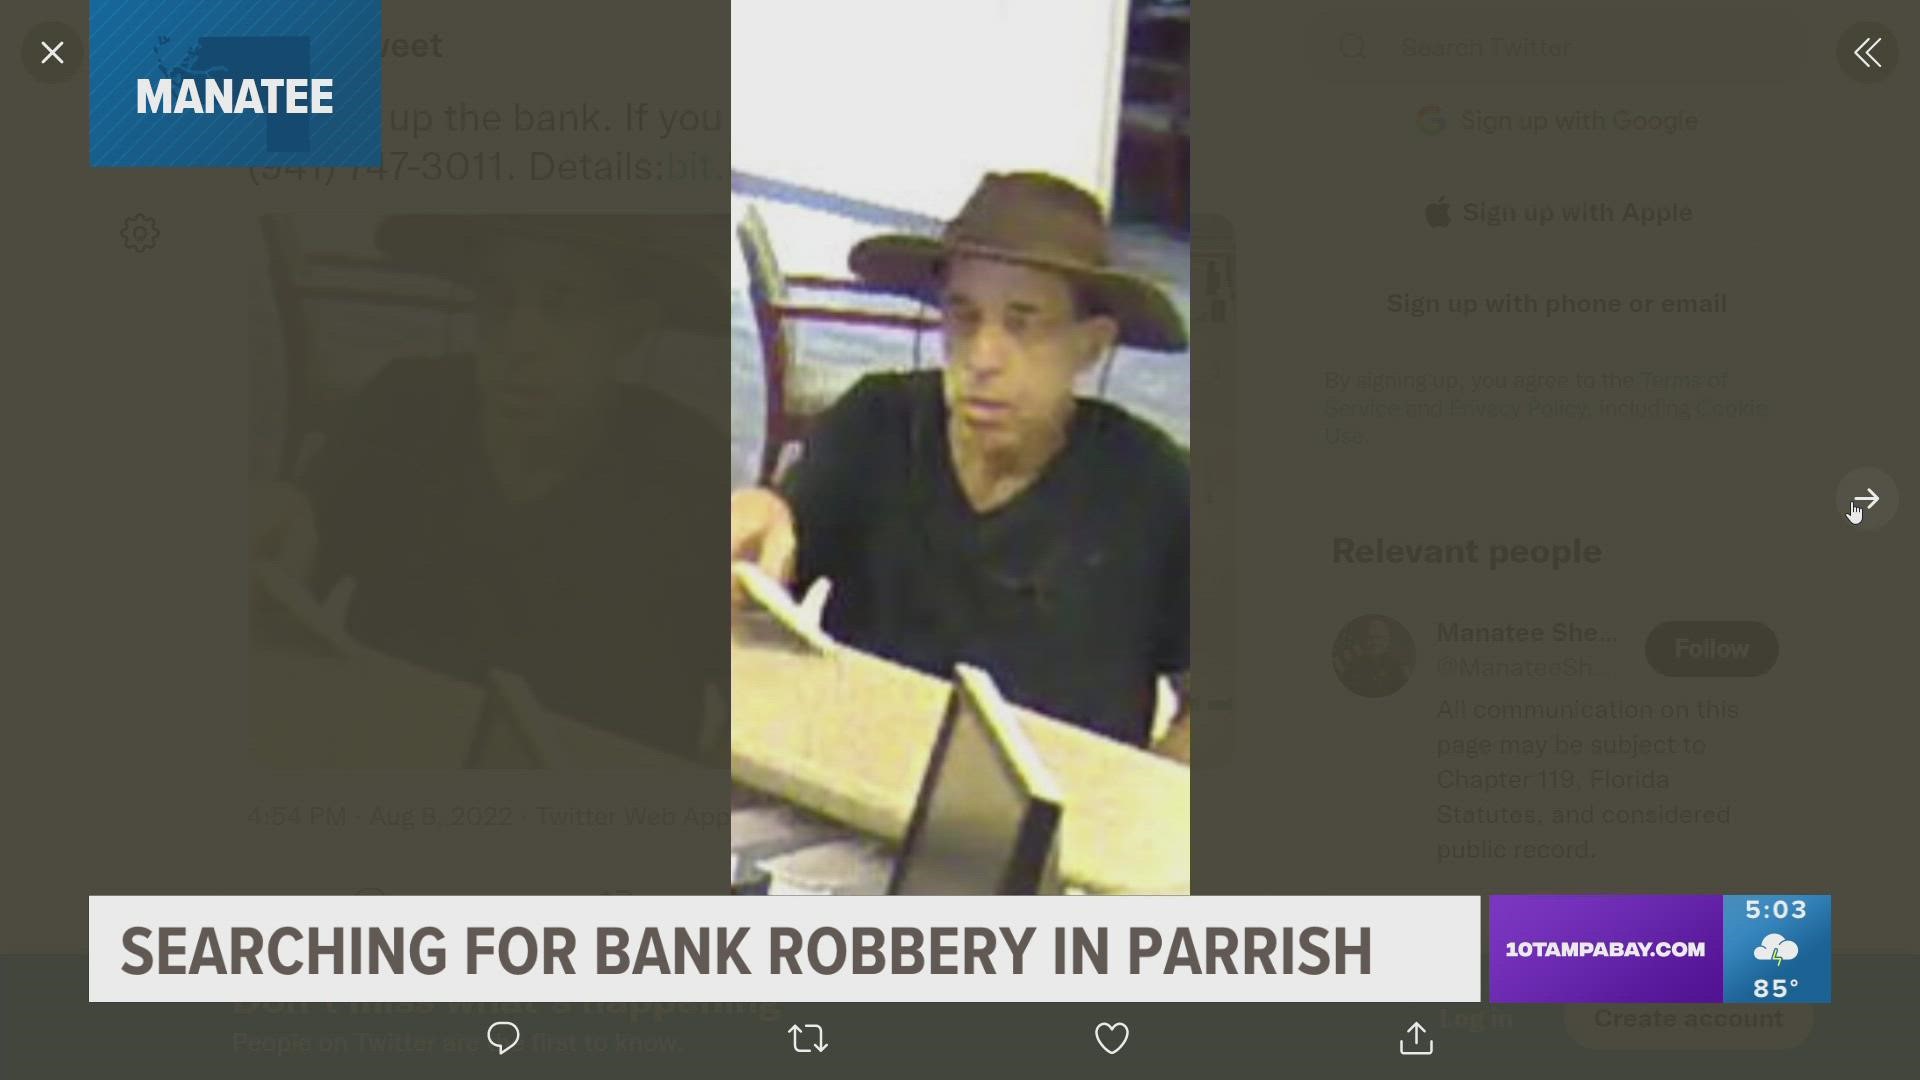 According to law enforcement, the teller handed over an undisclosed amount of cash before the man walked out of the bank.